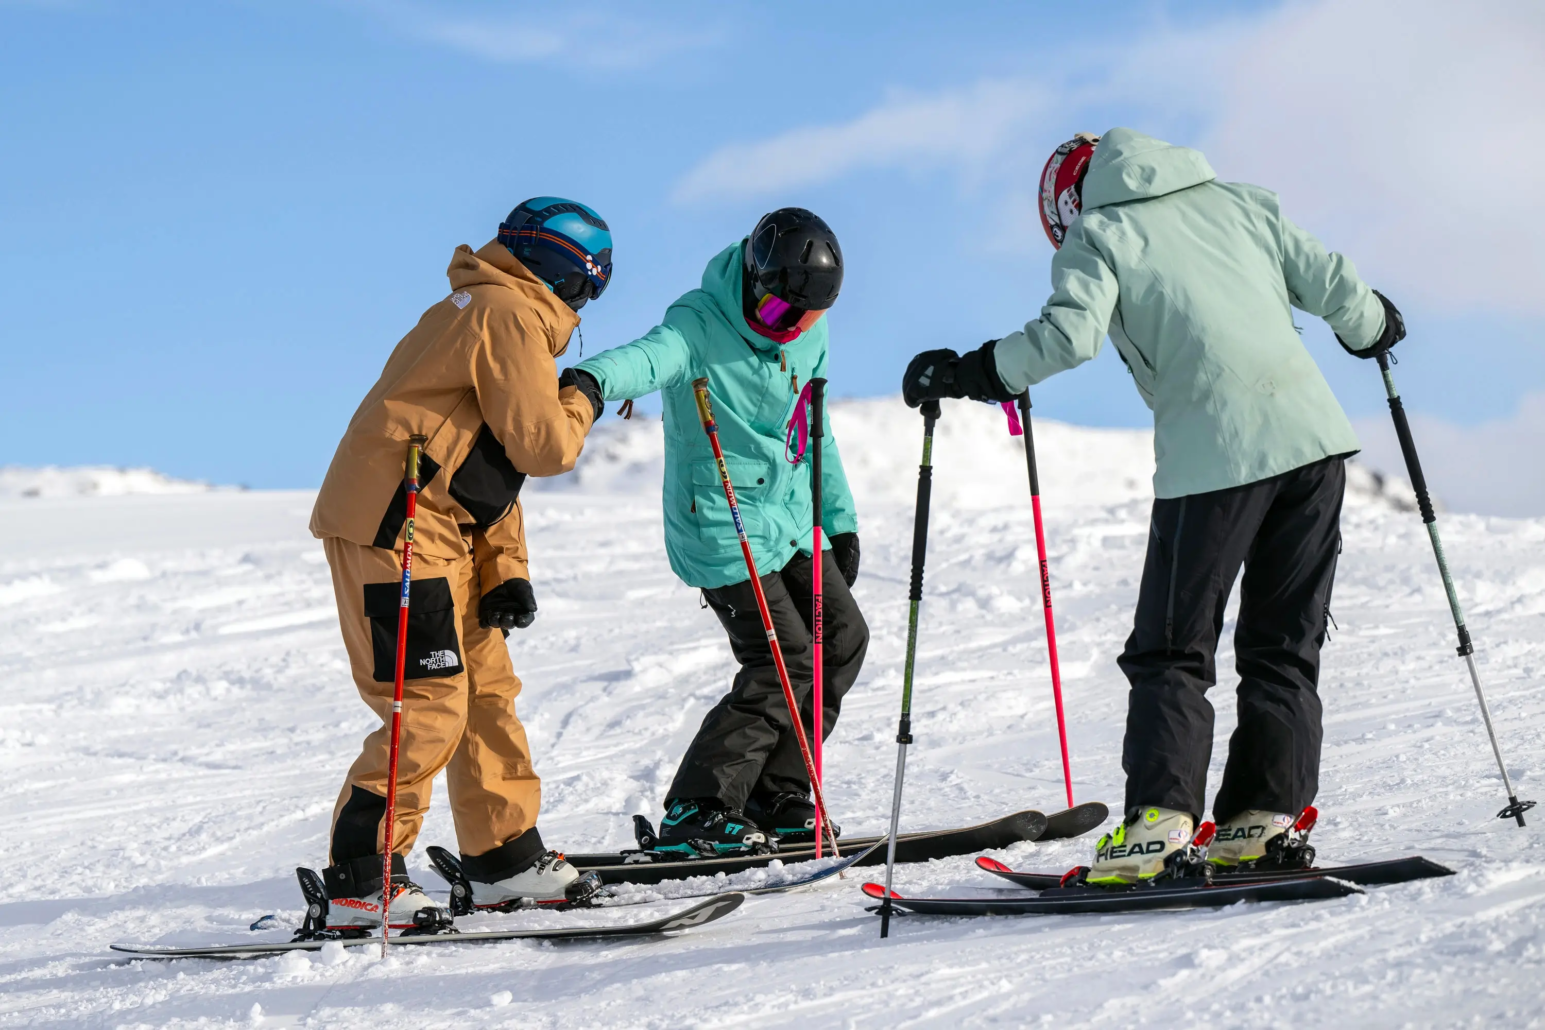 Skiers being coached on a course in Meribel